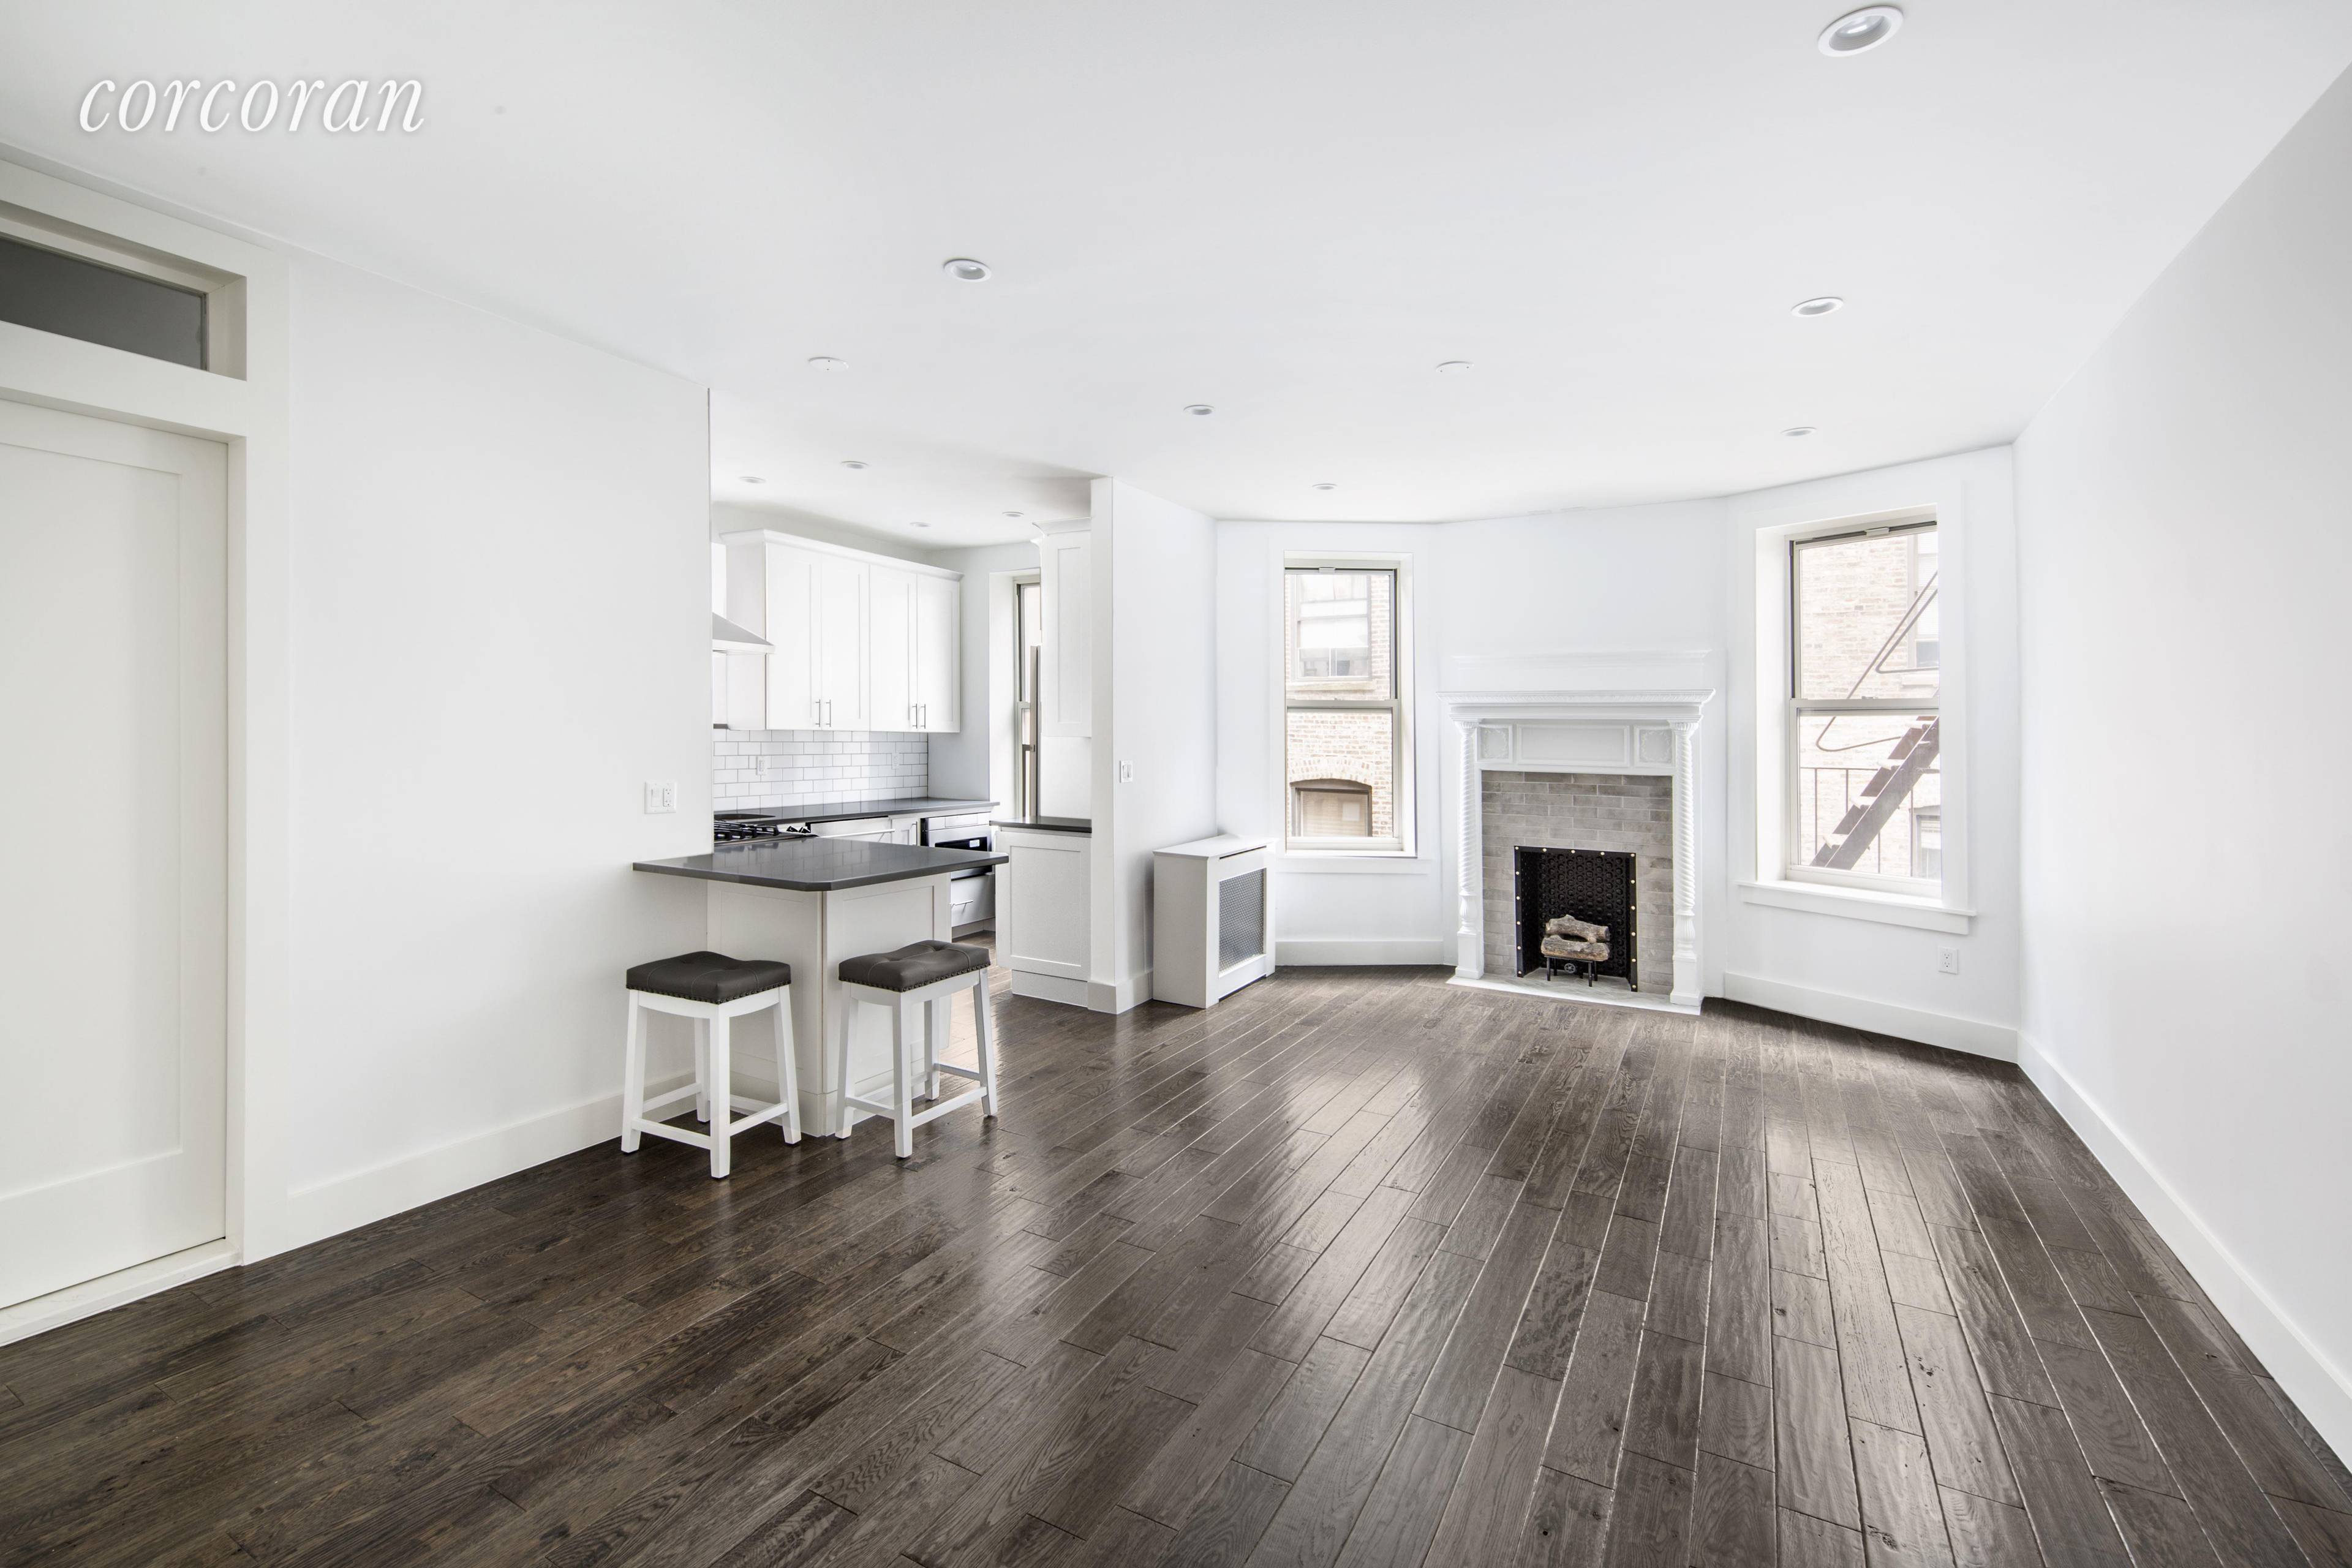 A true masterpiece at the most coveted location in Morningside Heights, right between Riverside Park and Columbia University.